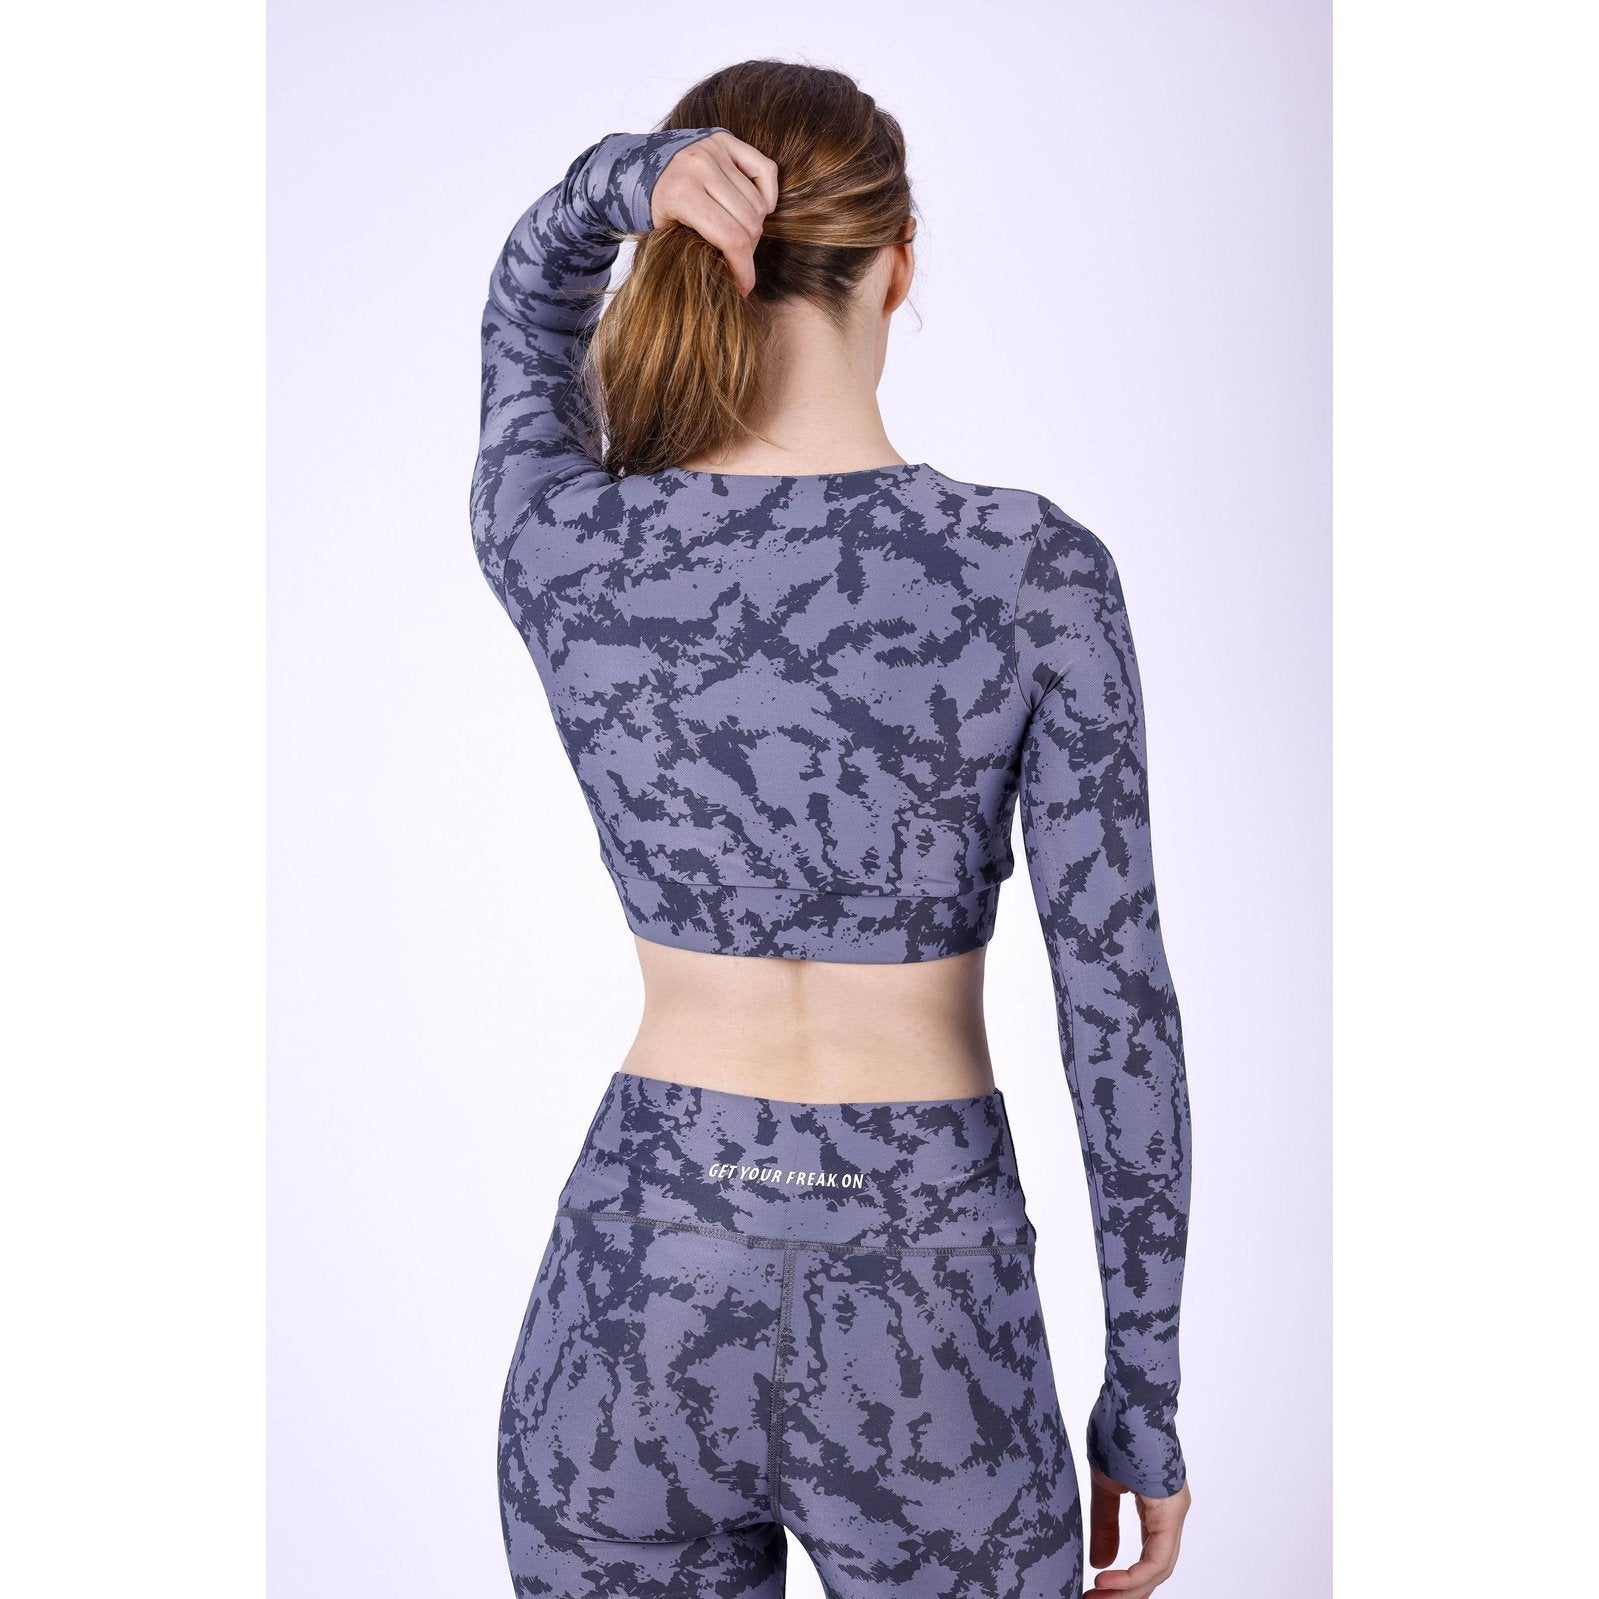 Cool Grey Camouflage Long Sleeve Top